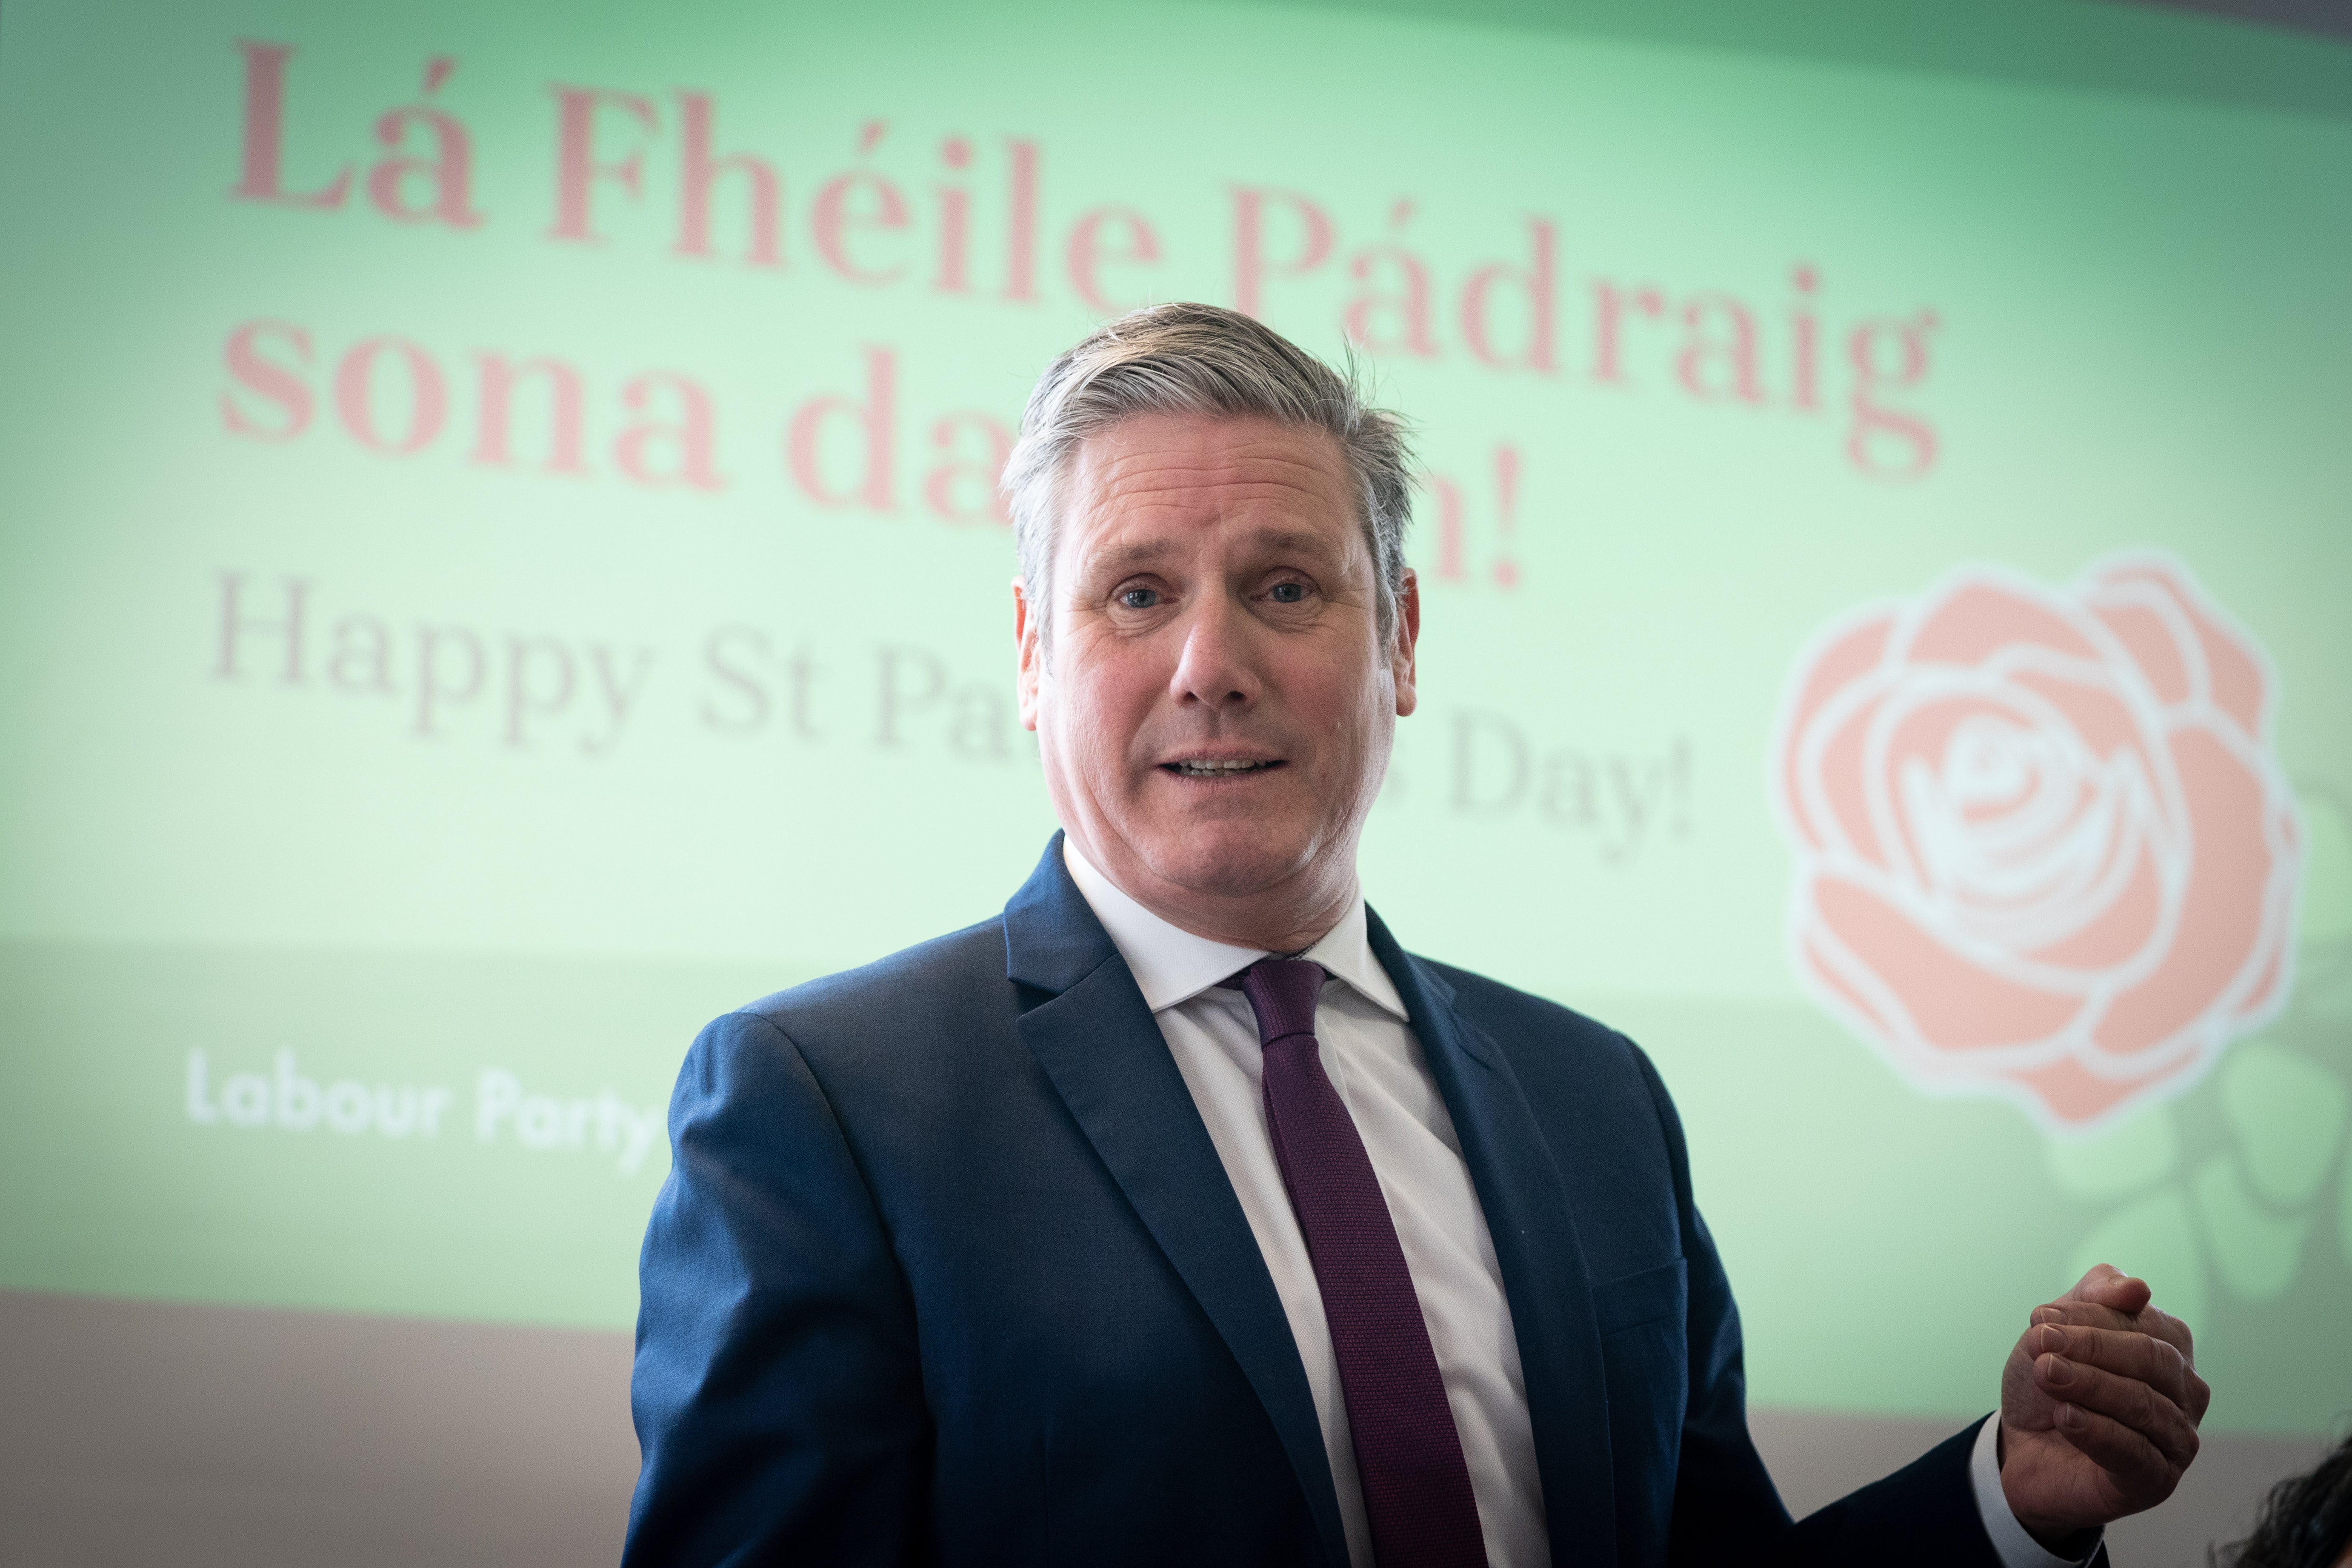 Labour leader Keir Starmer speaks to the Labour Party Irish Society Annual St Patrick’s Day reception at the London Irish Centre. (Stefan Rousseau/PA)